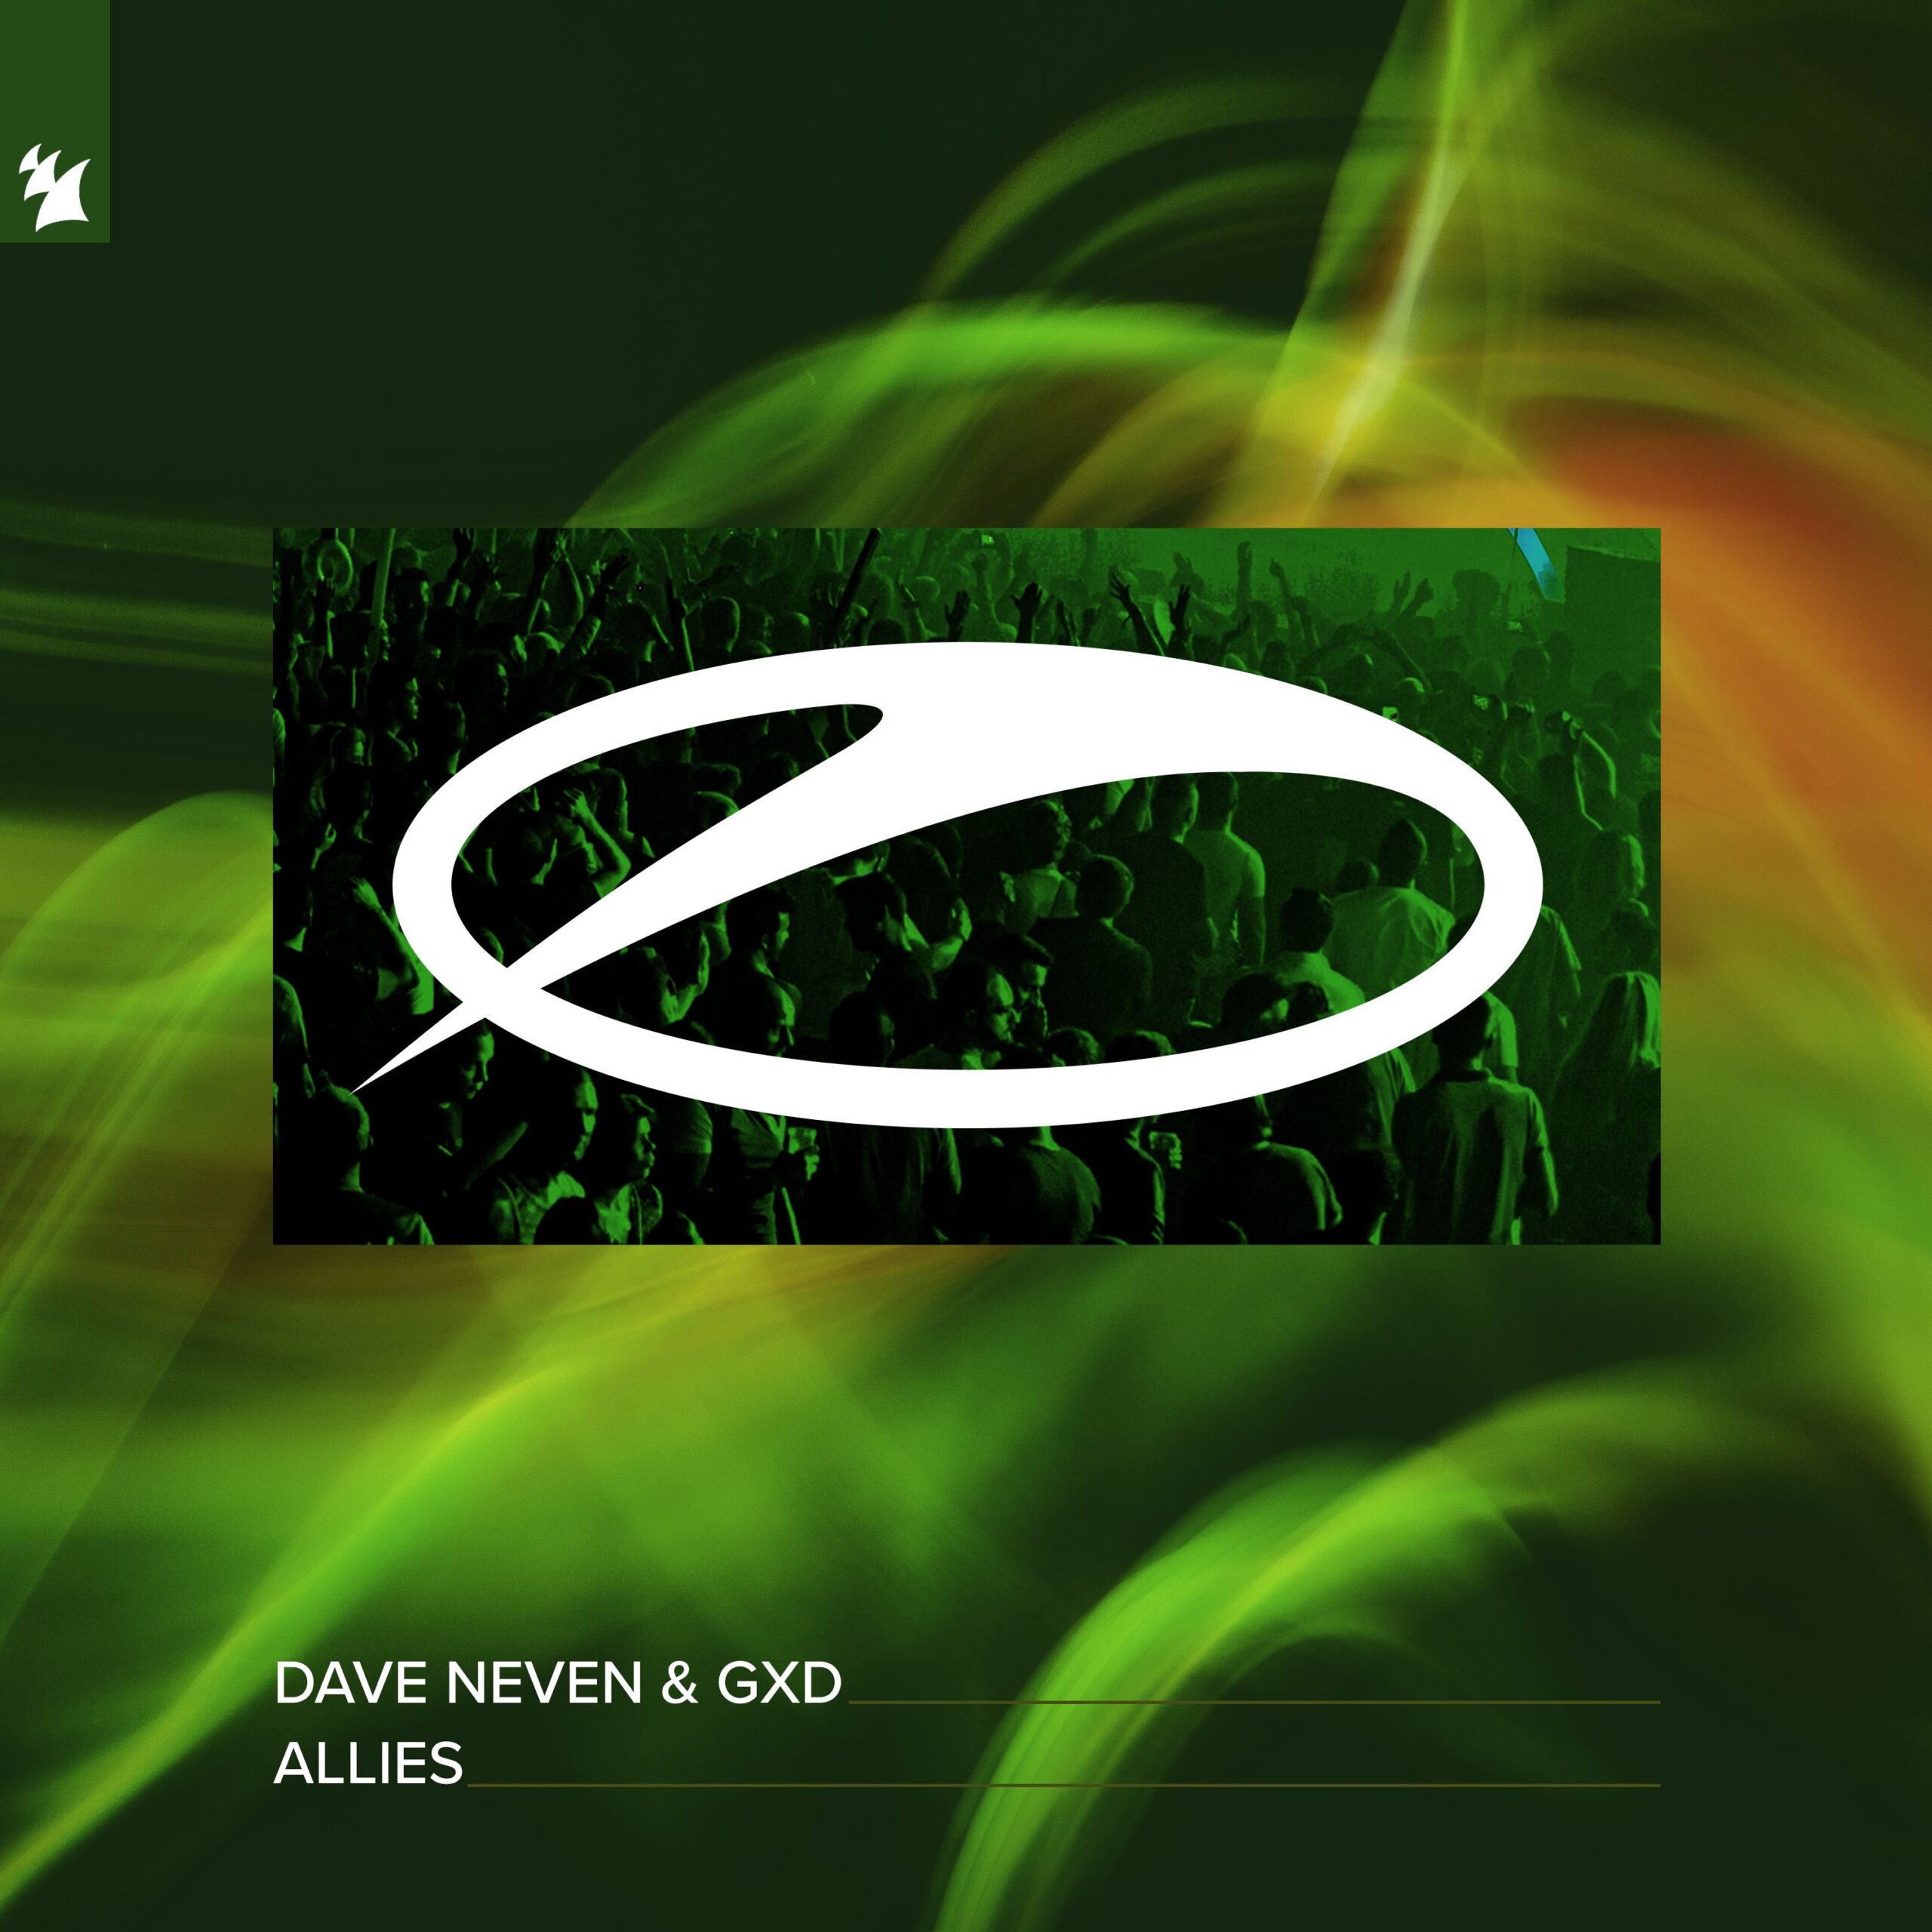 Dave Neven and GXD presents Allies on A State Of Trance